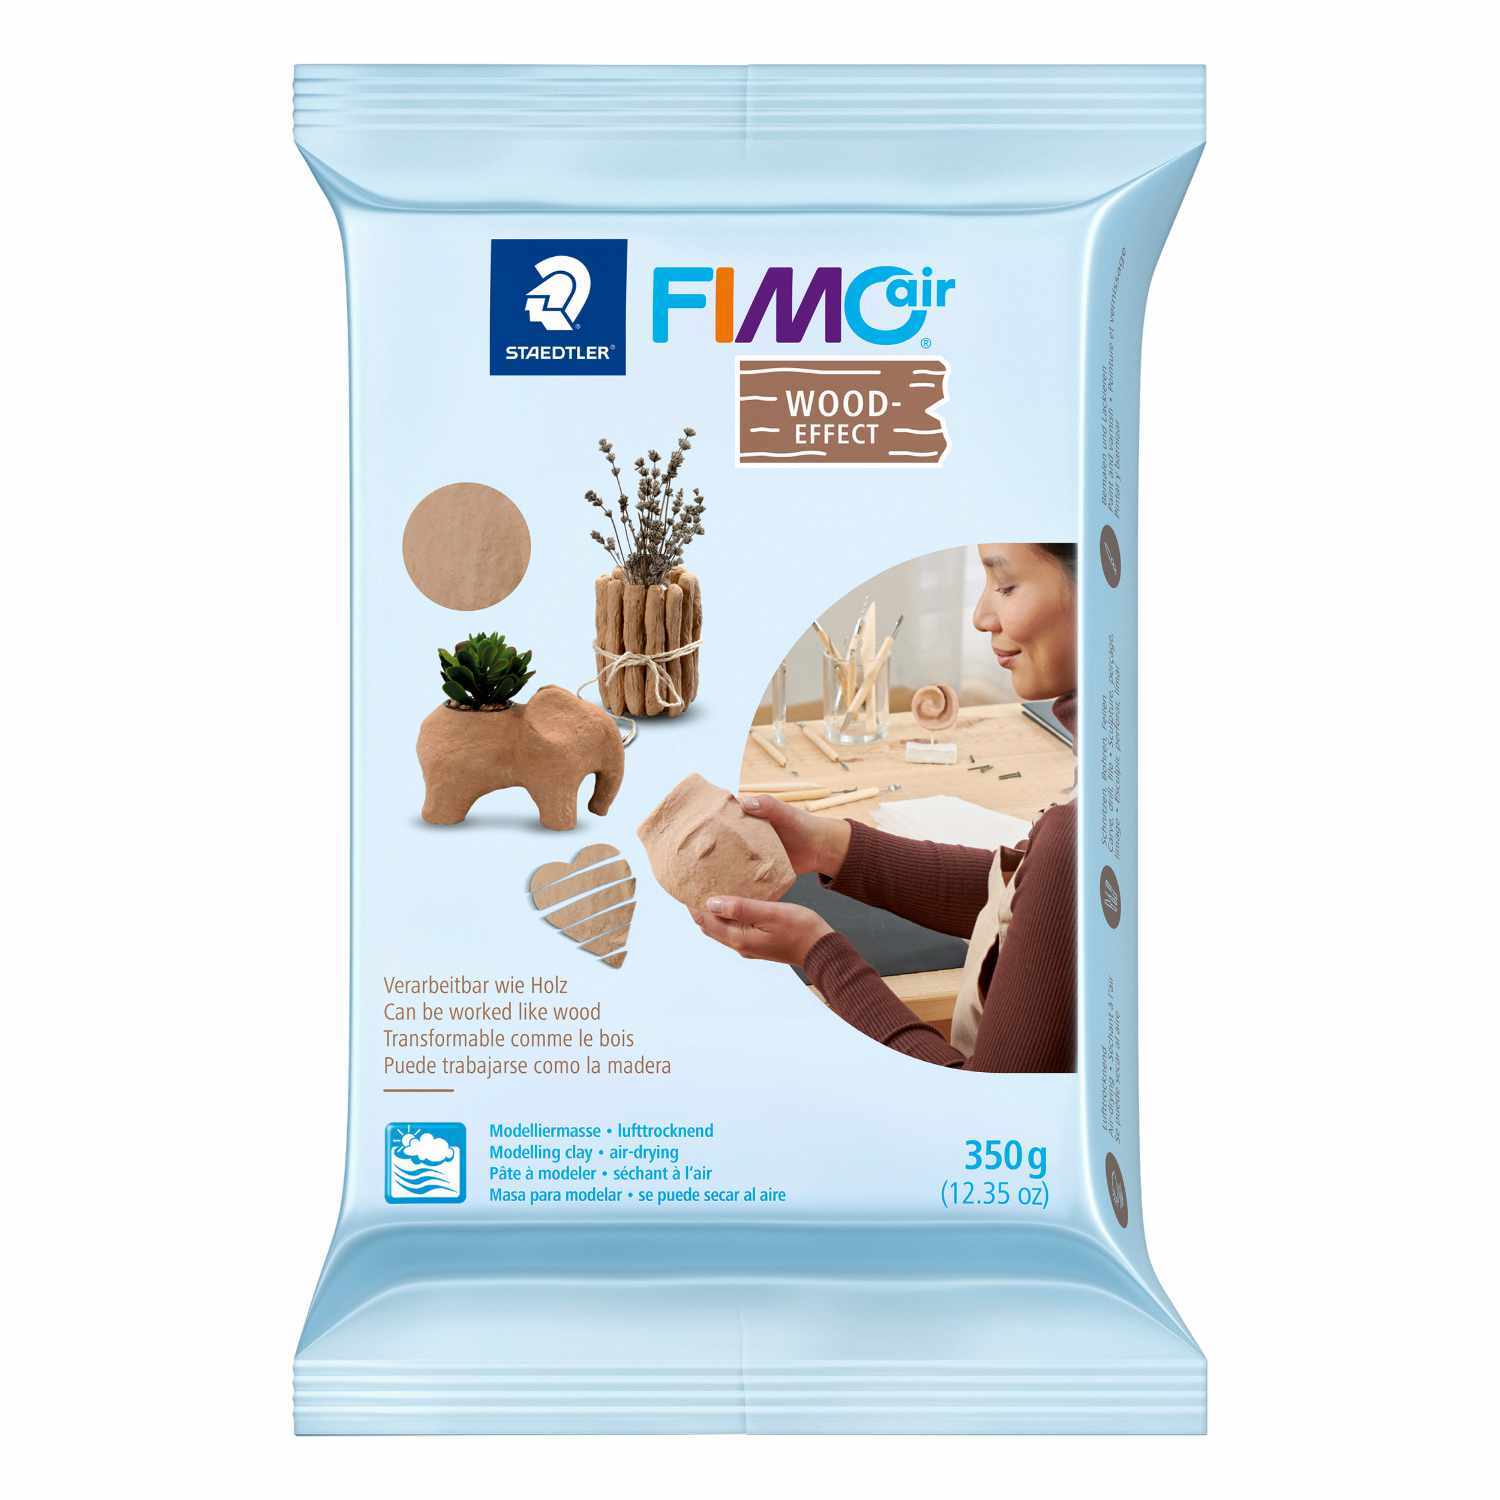 FIMO Air wood-effect 350g